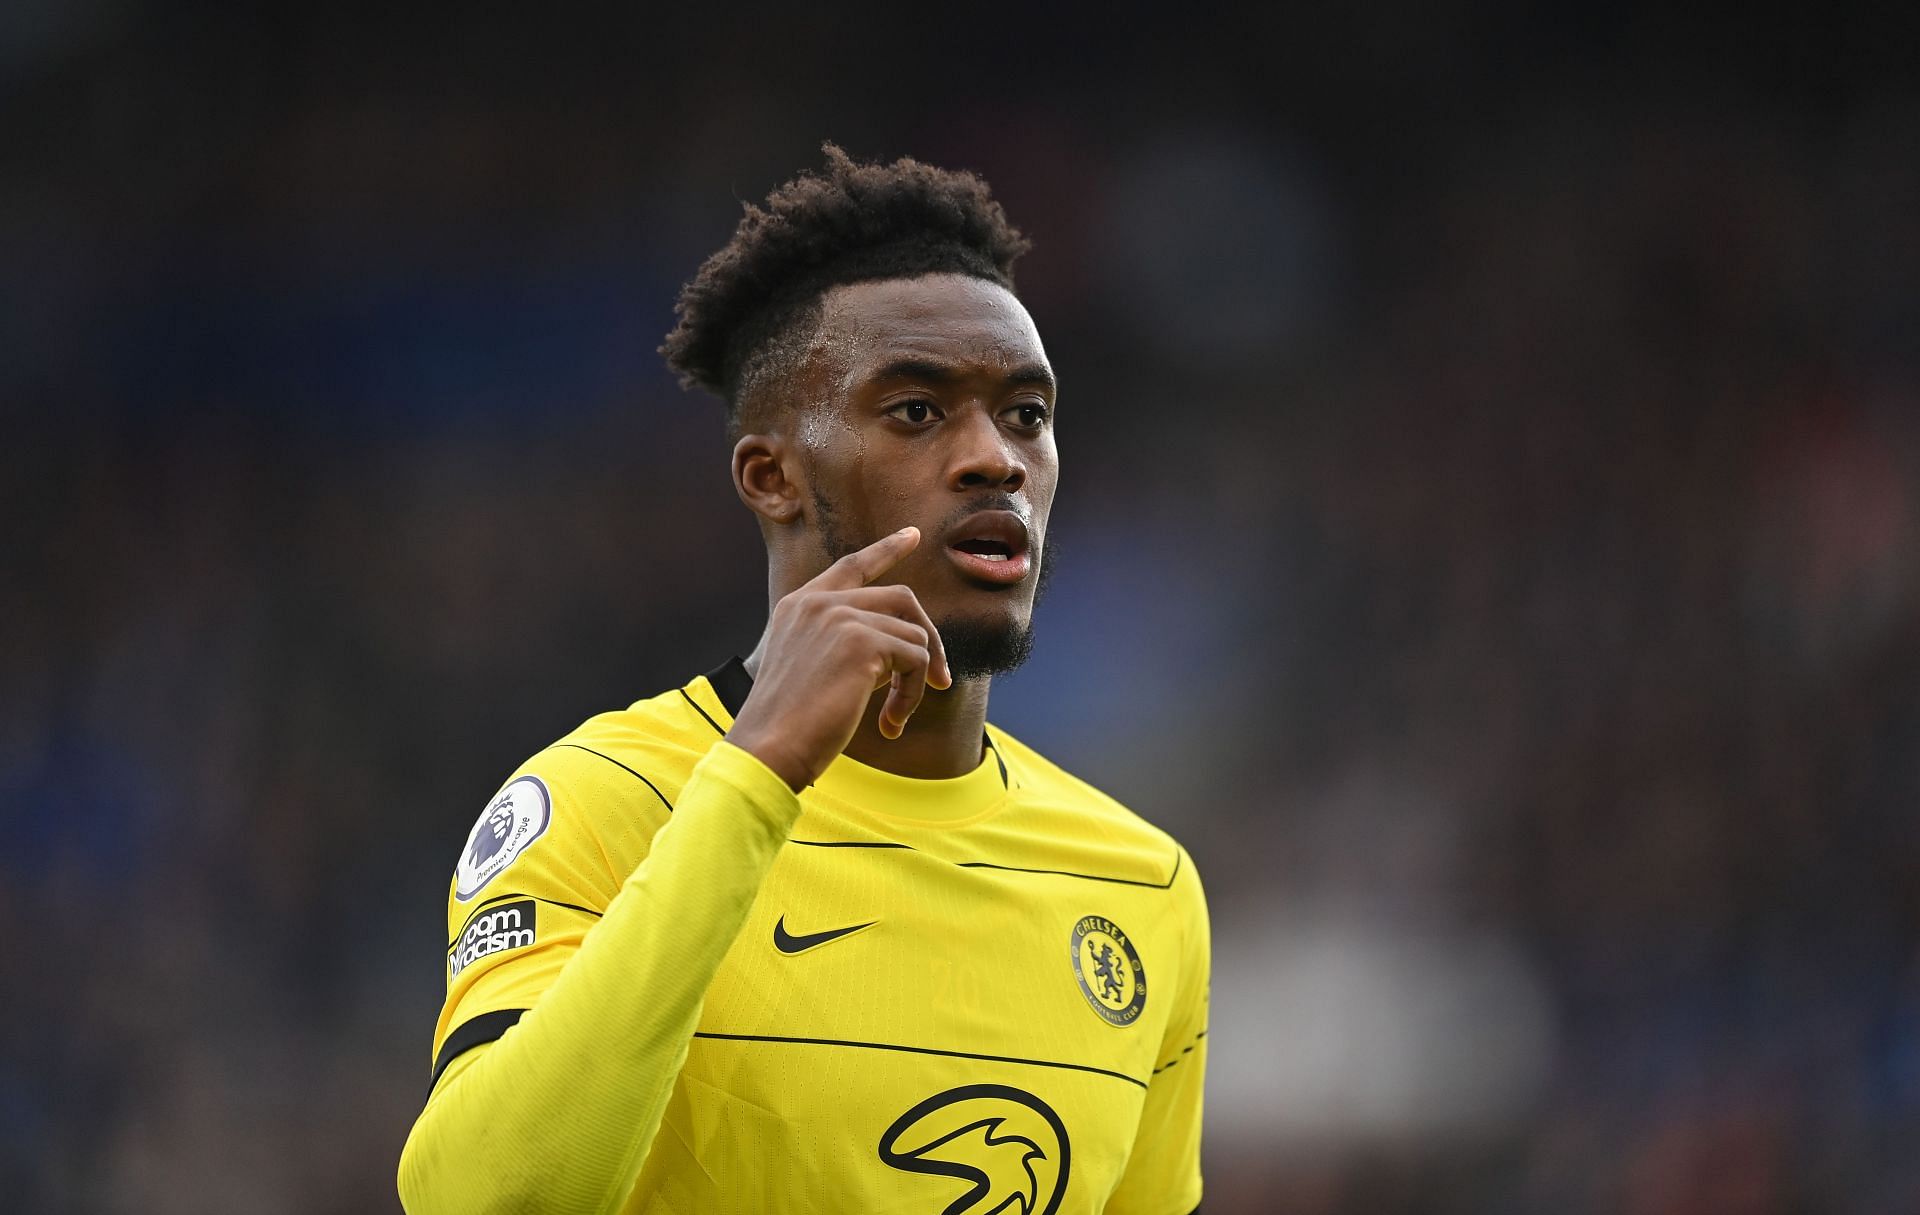 Hudson-Odoi might lose his place in the first team